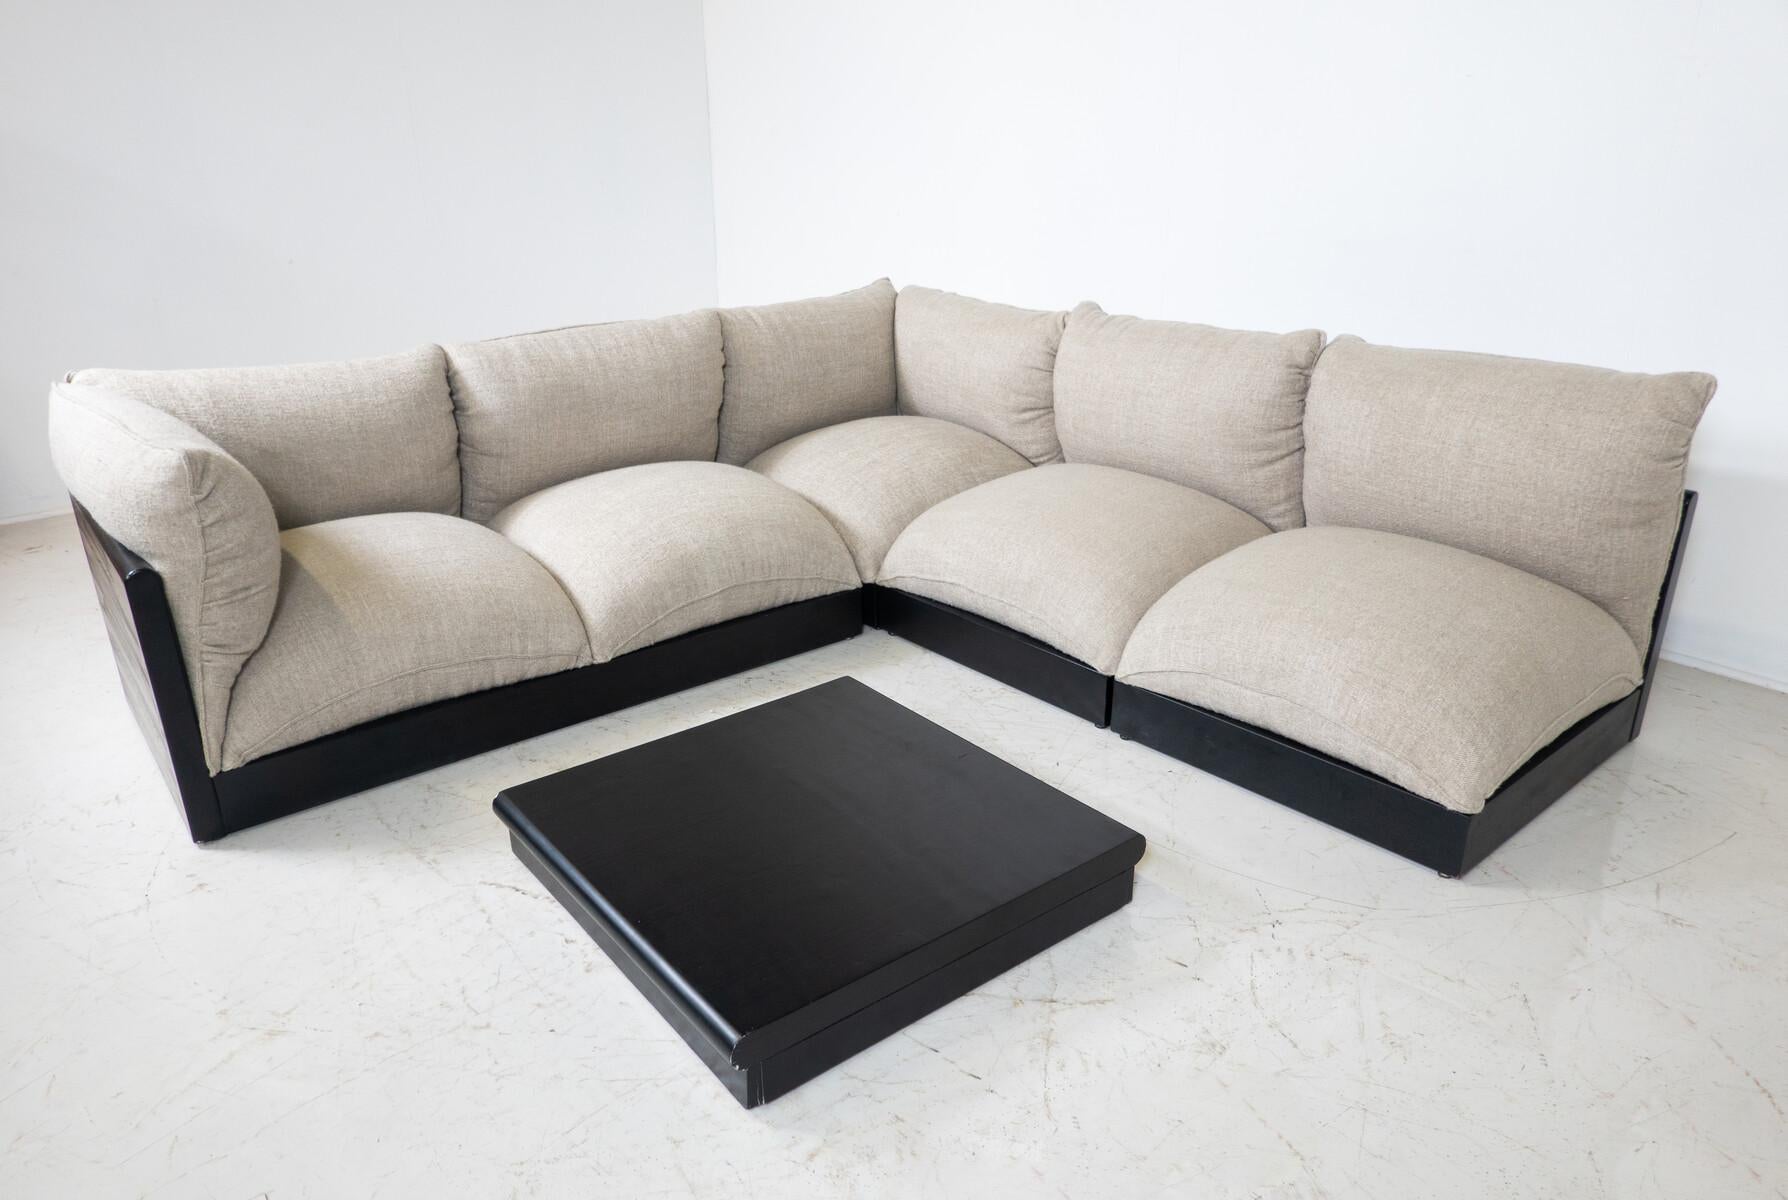 Blob Modular Sofa by Carlo Bartoli, italy, 1970s - New Upholstery In Good Condition For Sale In Brussels, BE